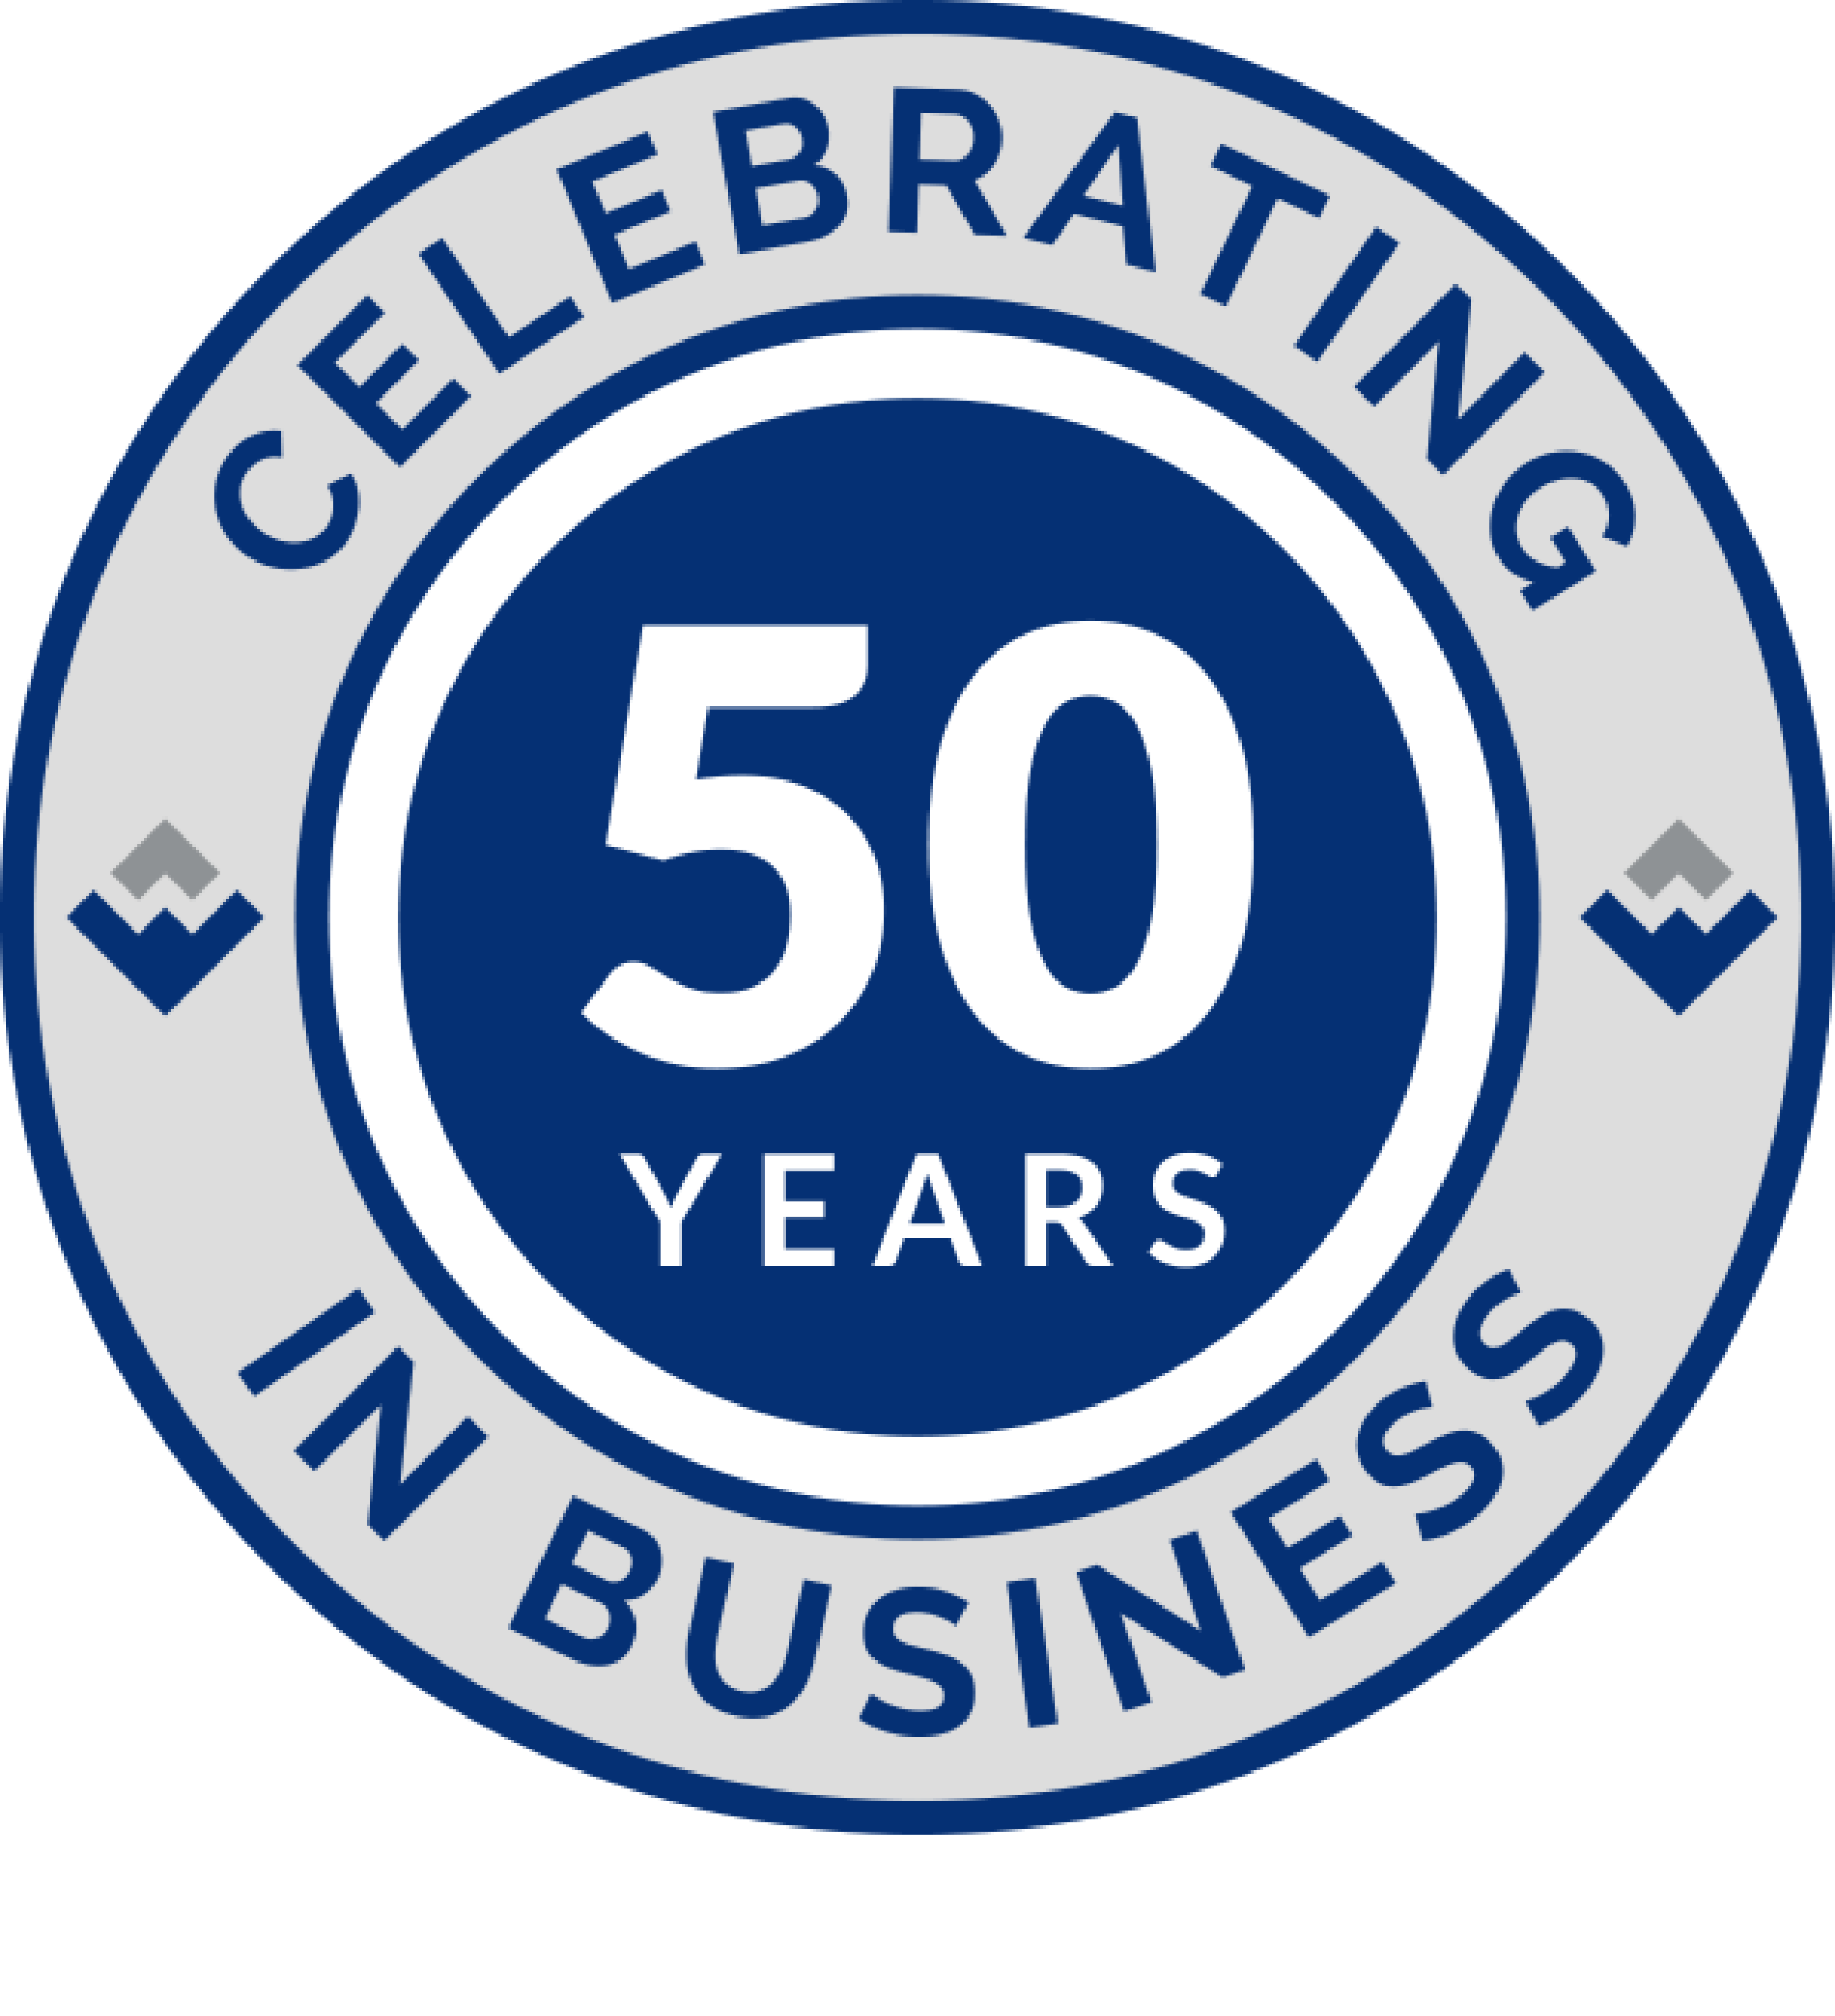 50 Years of Business